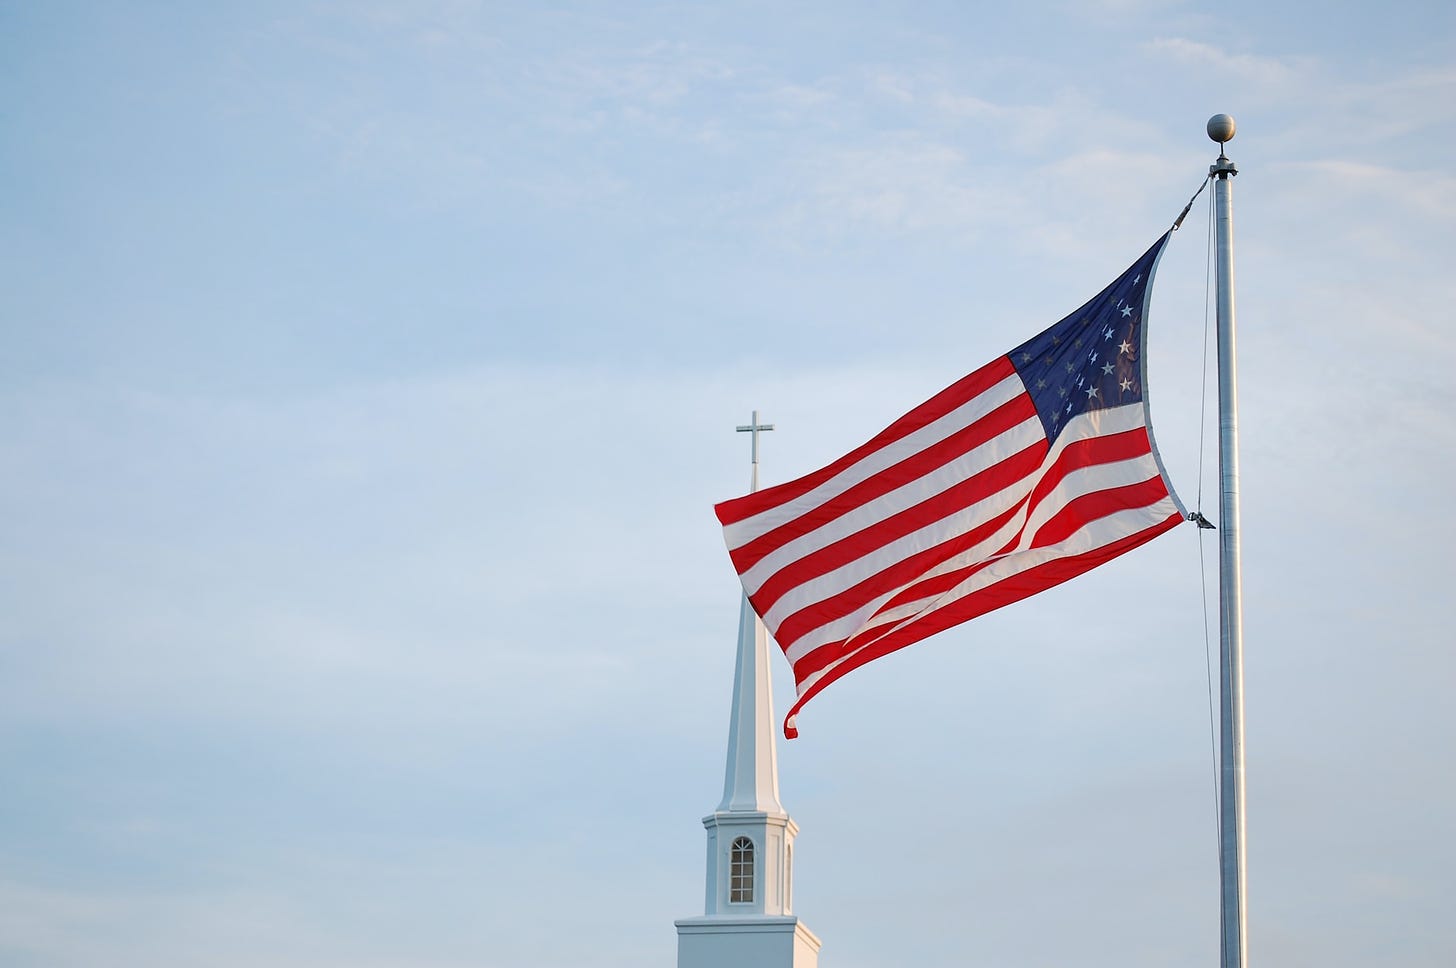 Large American flag flying in front of a church steeple with a cross on top.